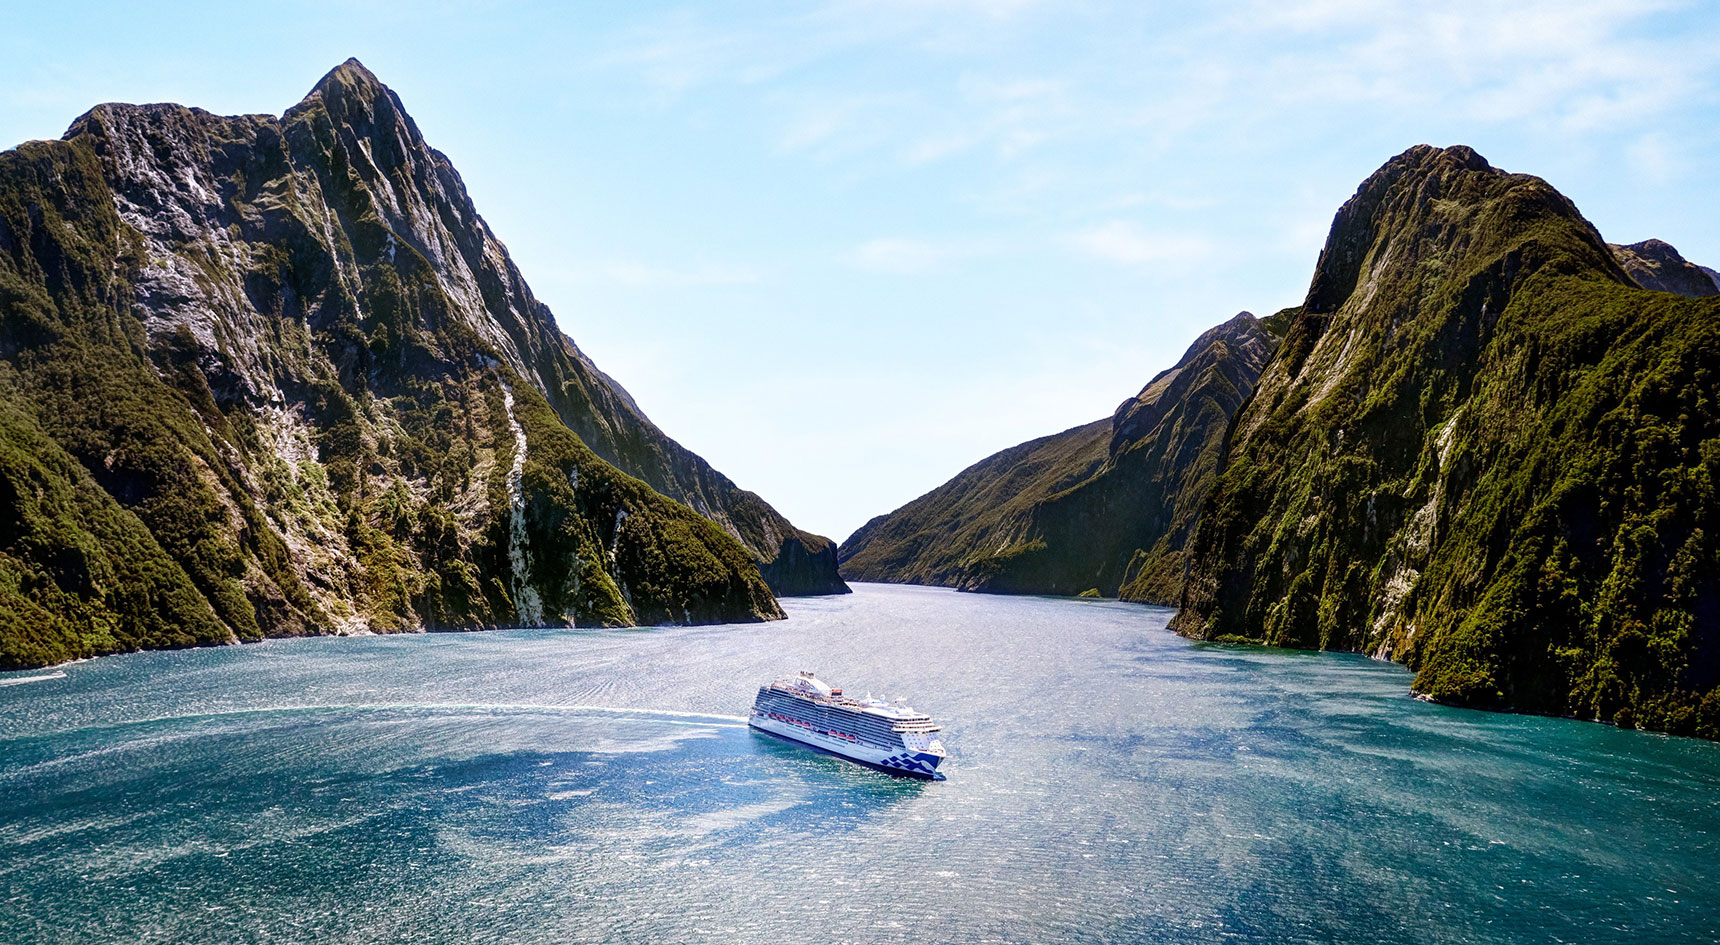 Cruise ship in the Milford Sound, New Zealand